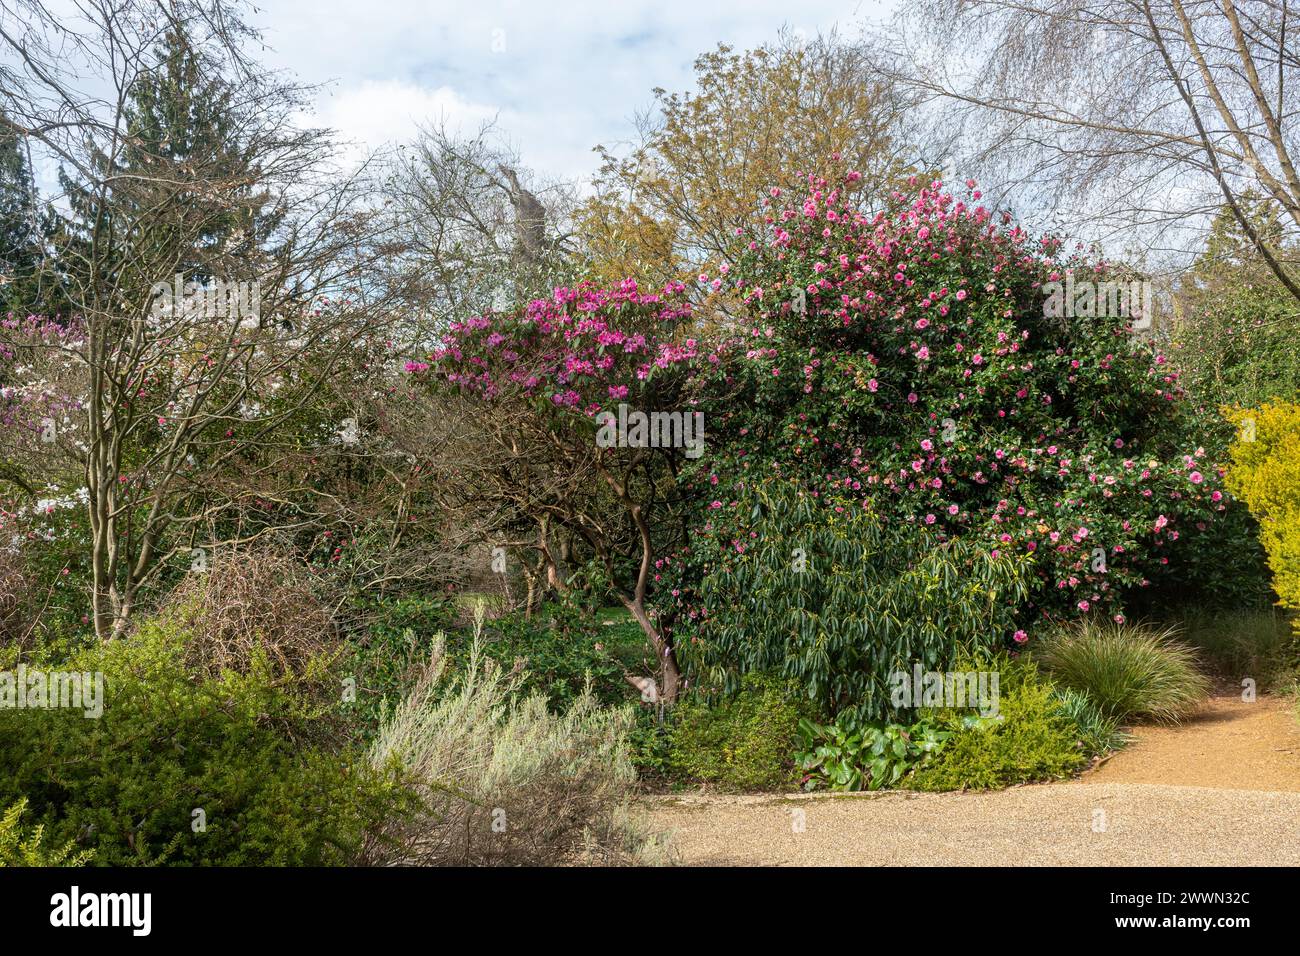 View of Savill Garden during March or Spring with colourful flowering shrubs including rhododendron and camellia, Berkshire, England, UK Stock Photo